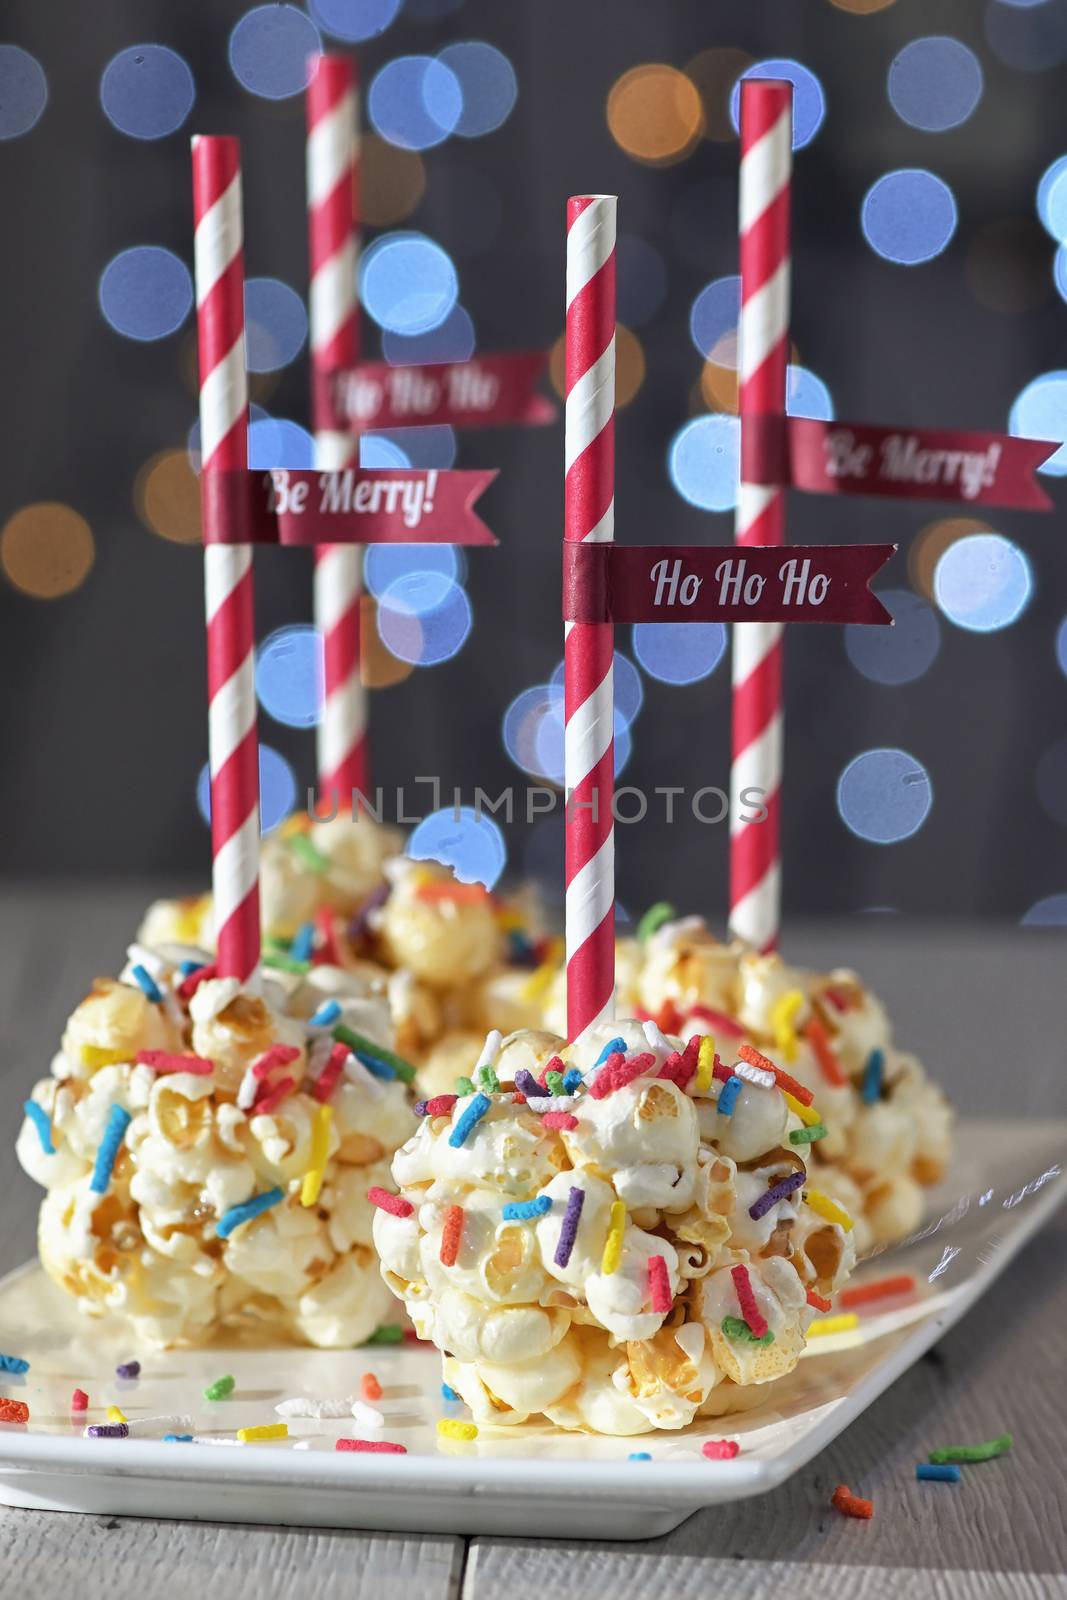 Popcorn Ball and Confetti Sprinkles Lollipop by mady70